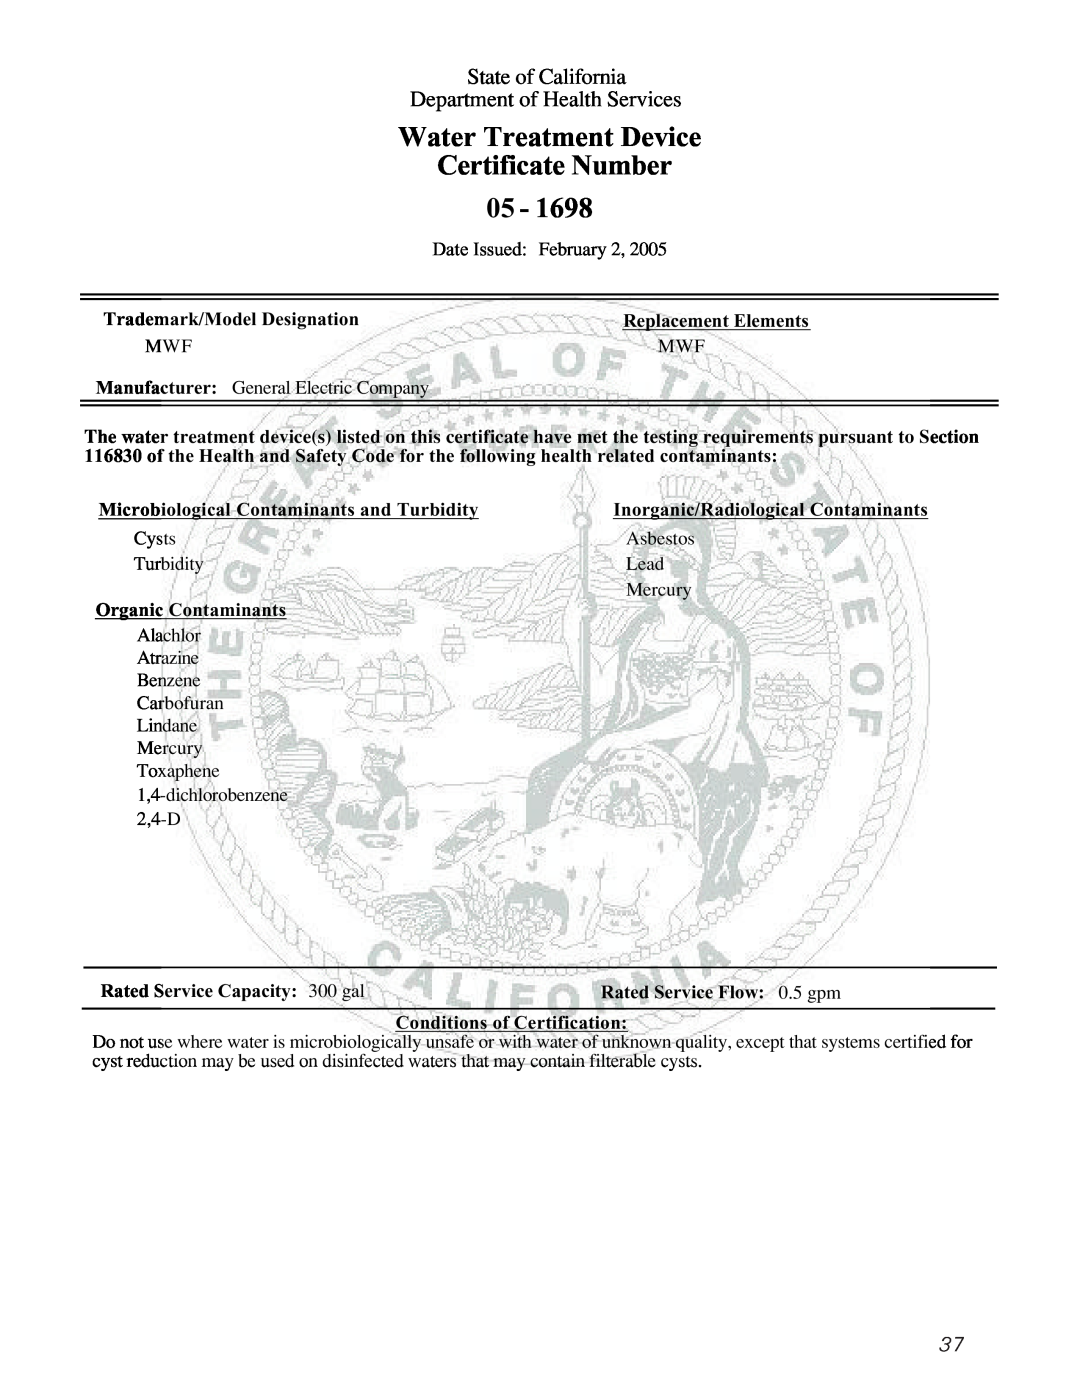 GE 25 and 27 Water Treatment Device, State of California, Department of Health Services, Certificate Number, 05 